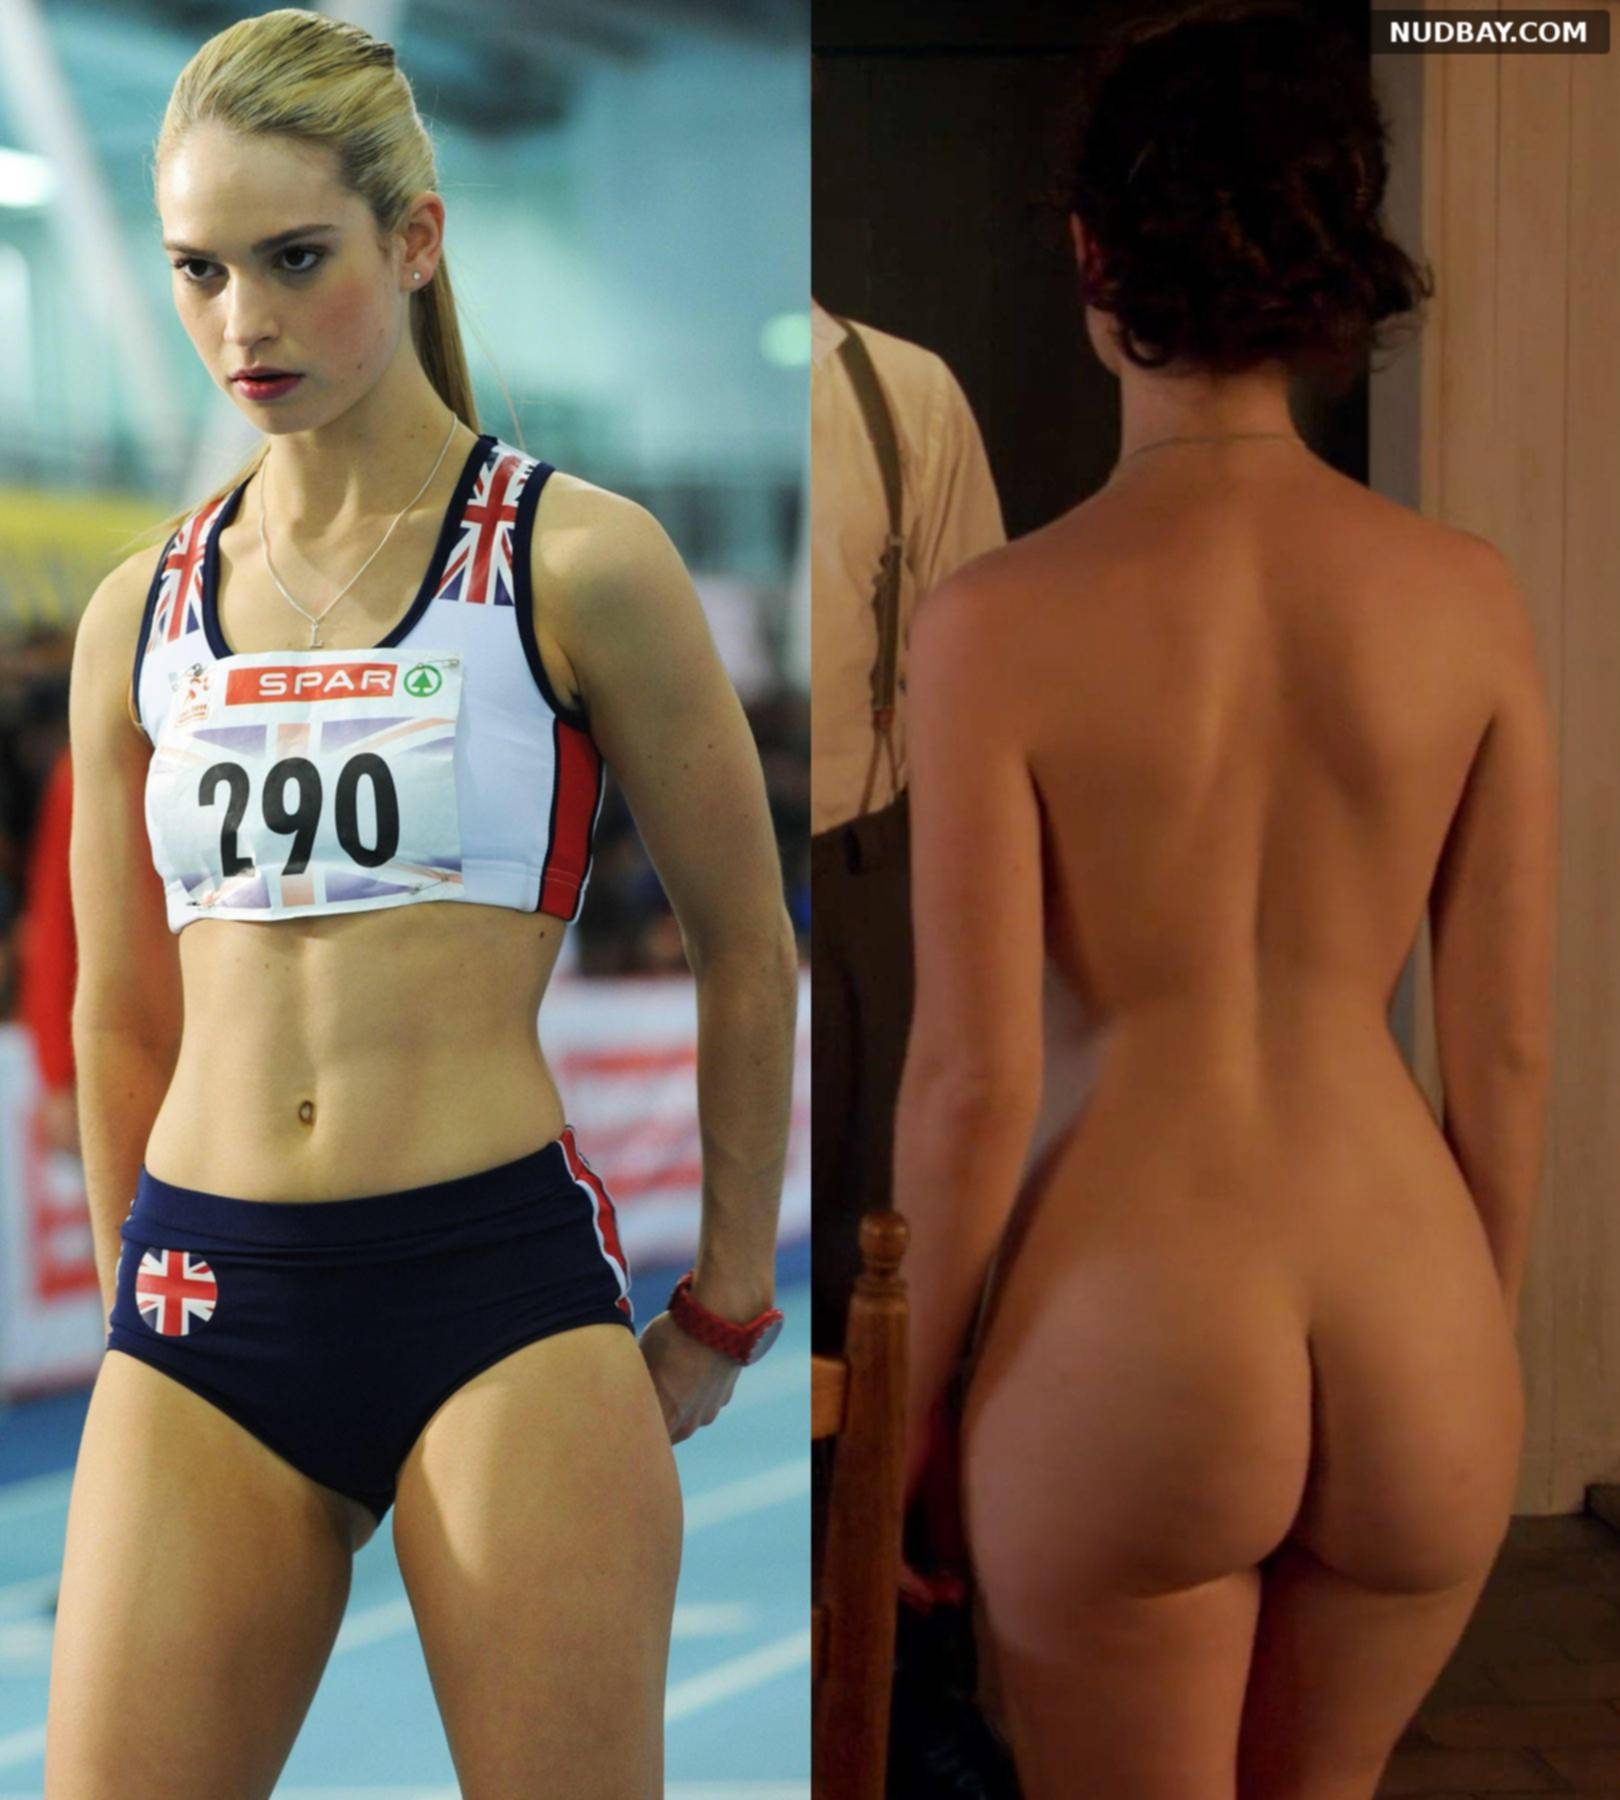 Photos of james nude lily Lily James